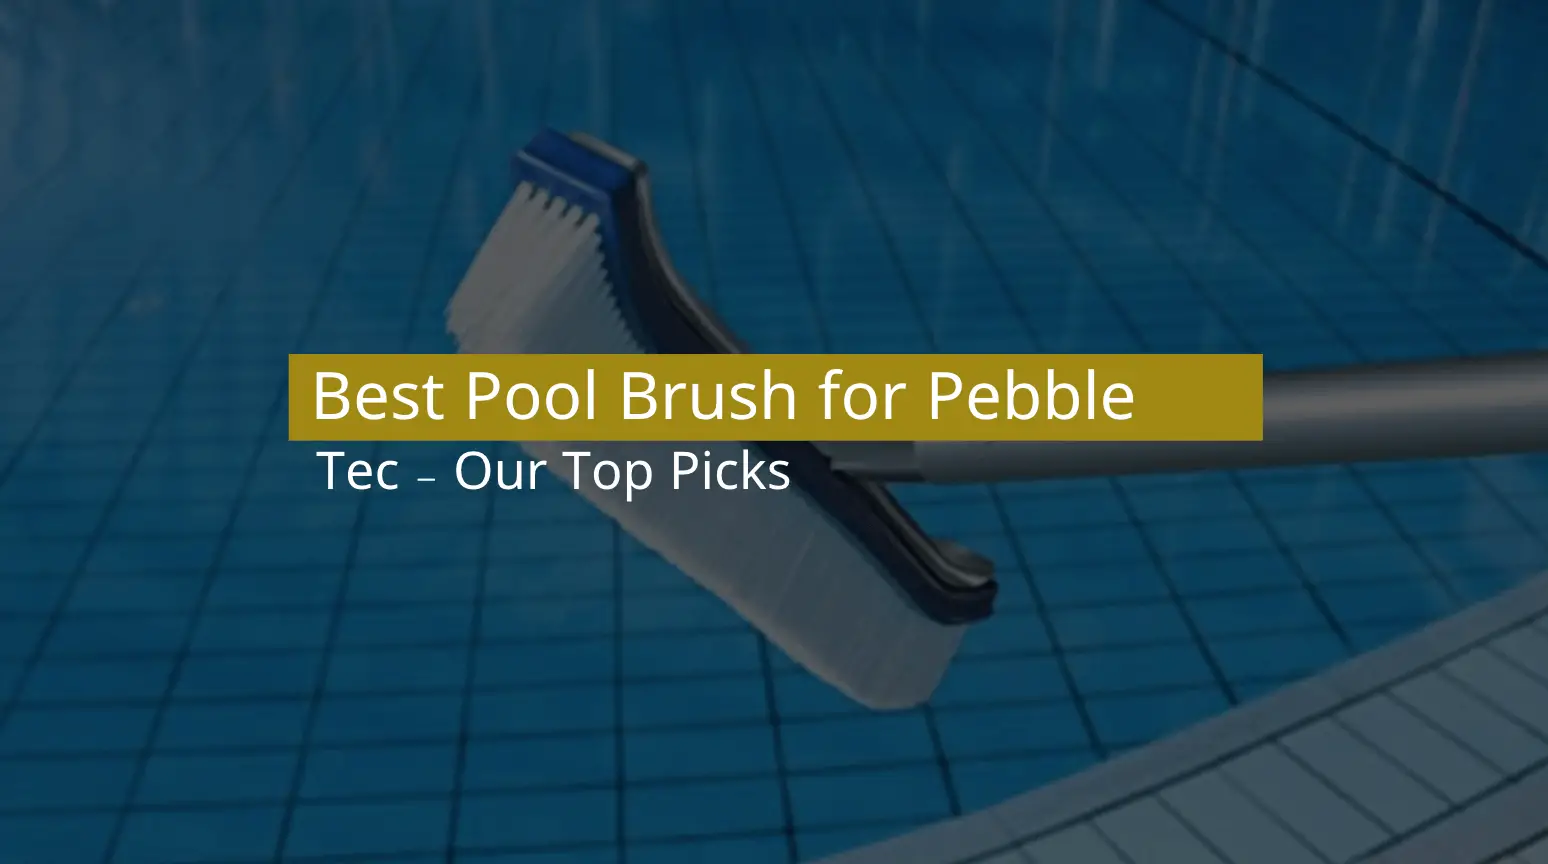 Best Pool Brush for Pebble Tec in 2022 - Our Top Picks & Guide